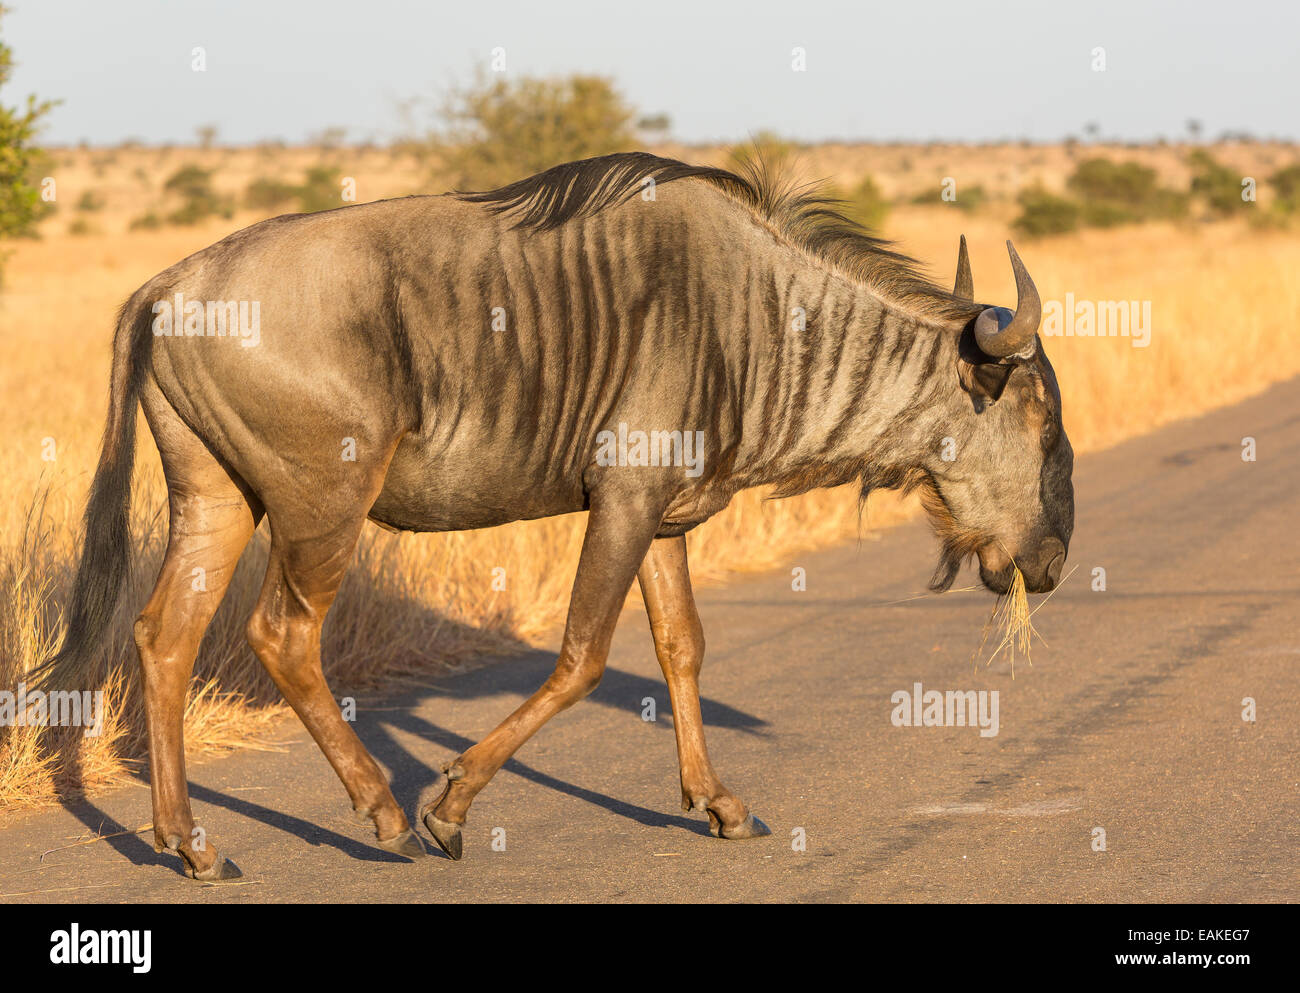 KRUGER NATIONAL PARK, SOUTH AFRICA - Blue Wildebeest crossing road Stock Photo